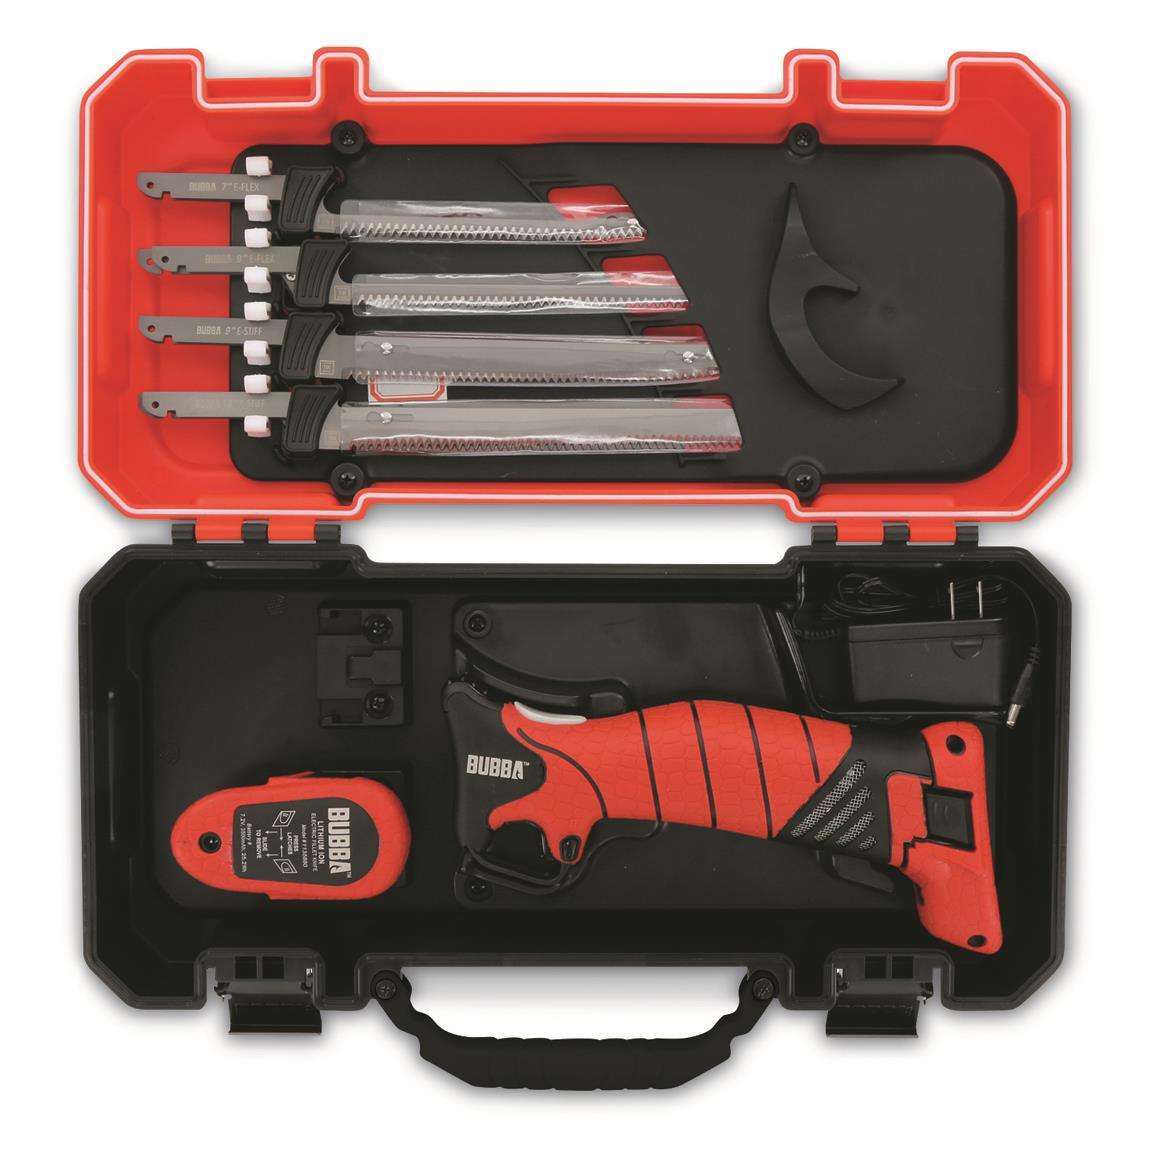 Bubba Pro Series Lithium-ion Electric Fillet Knife Set w/ Hard Case, 4 Blades